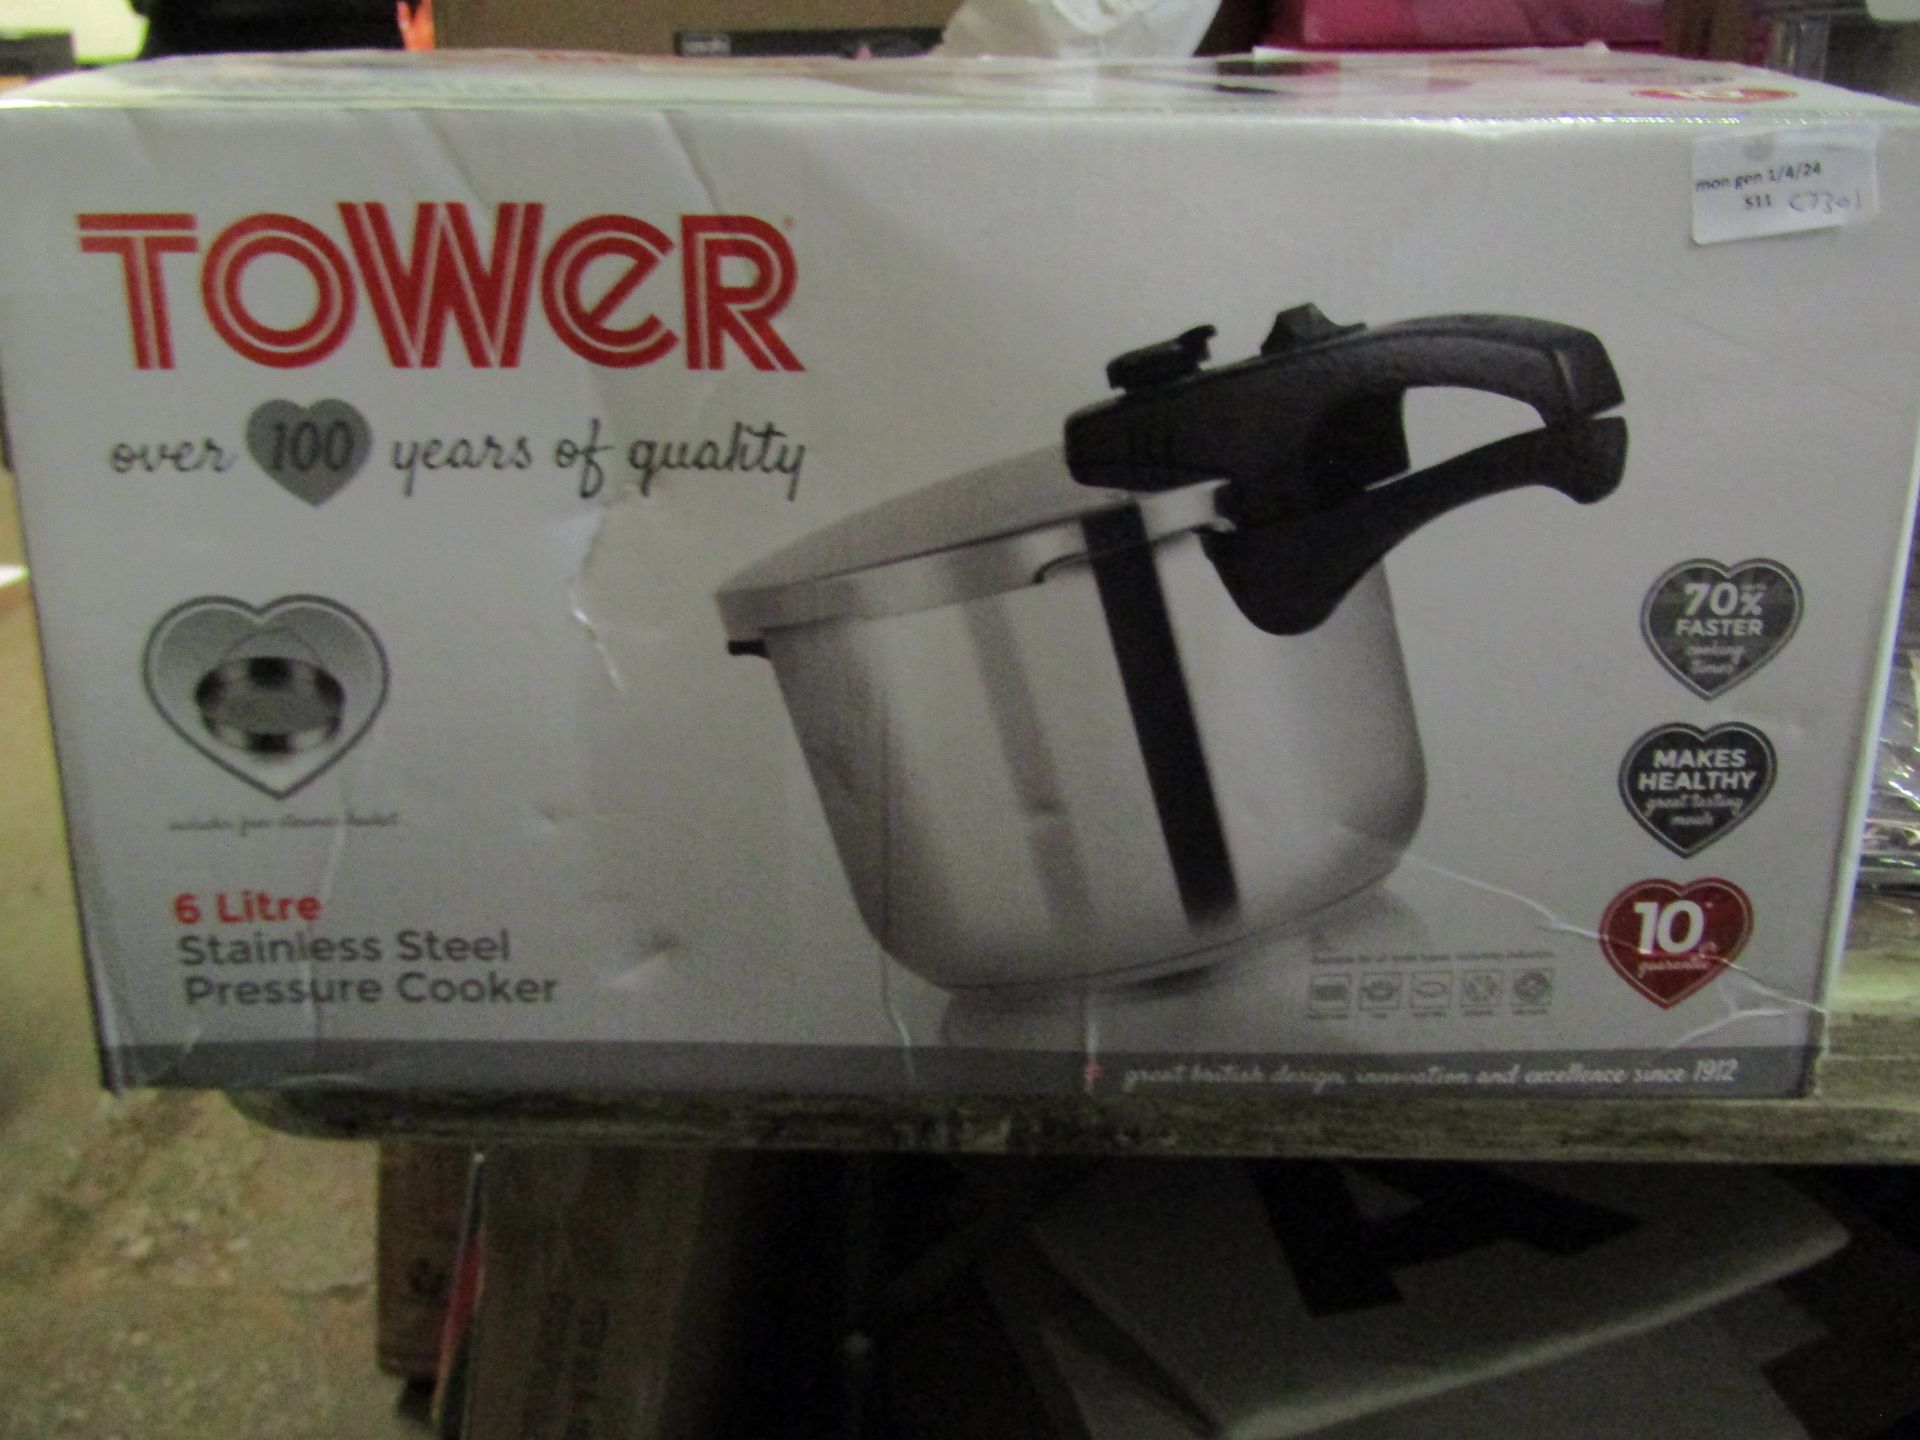 Tower 6L Stainless Steel Pressure Cooker - Unchecked & Boxed.